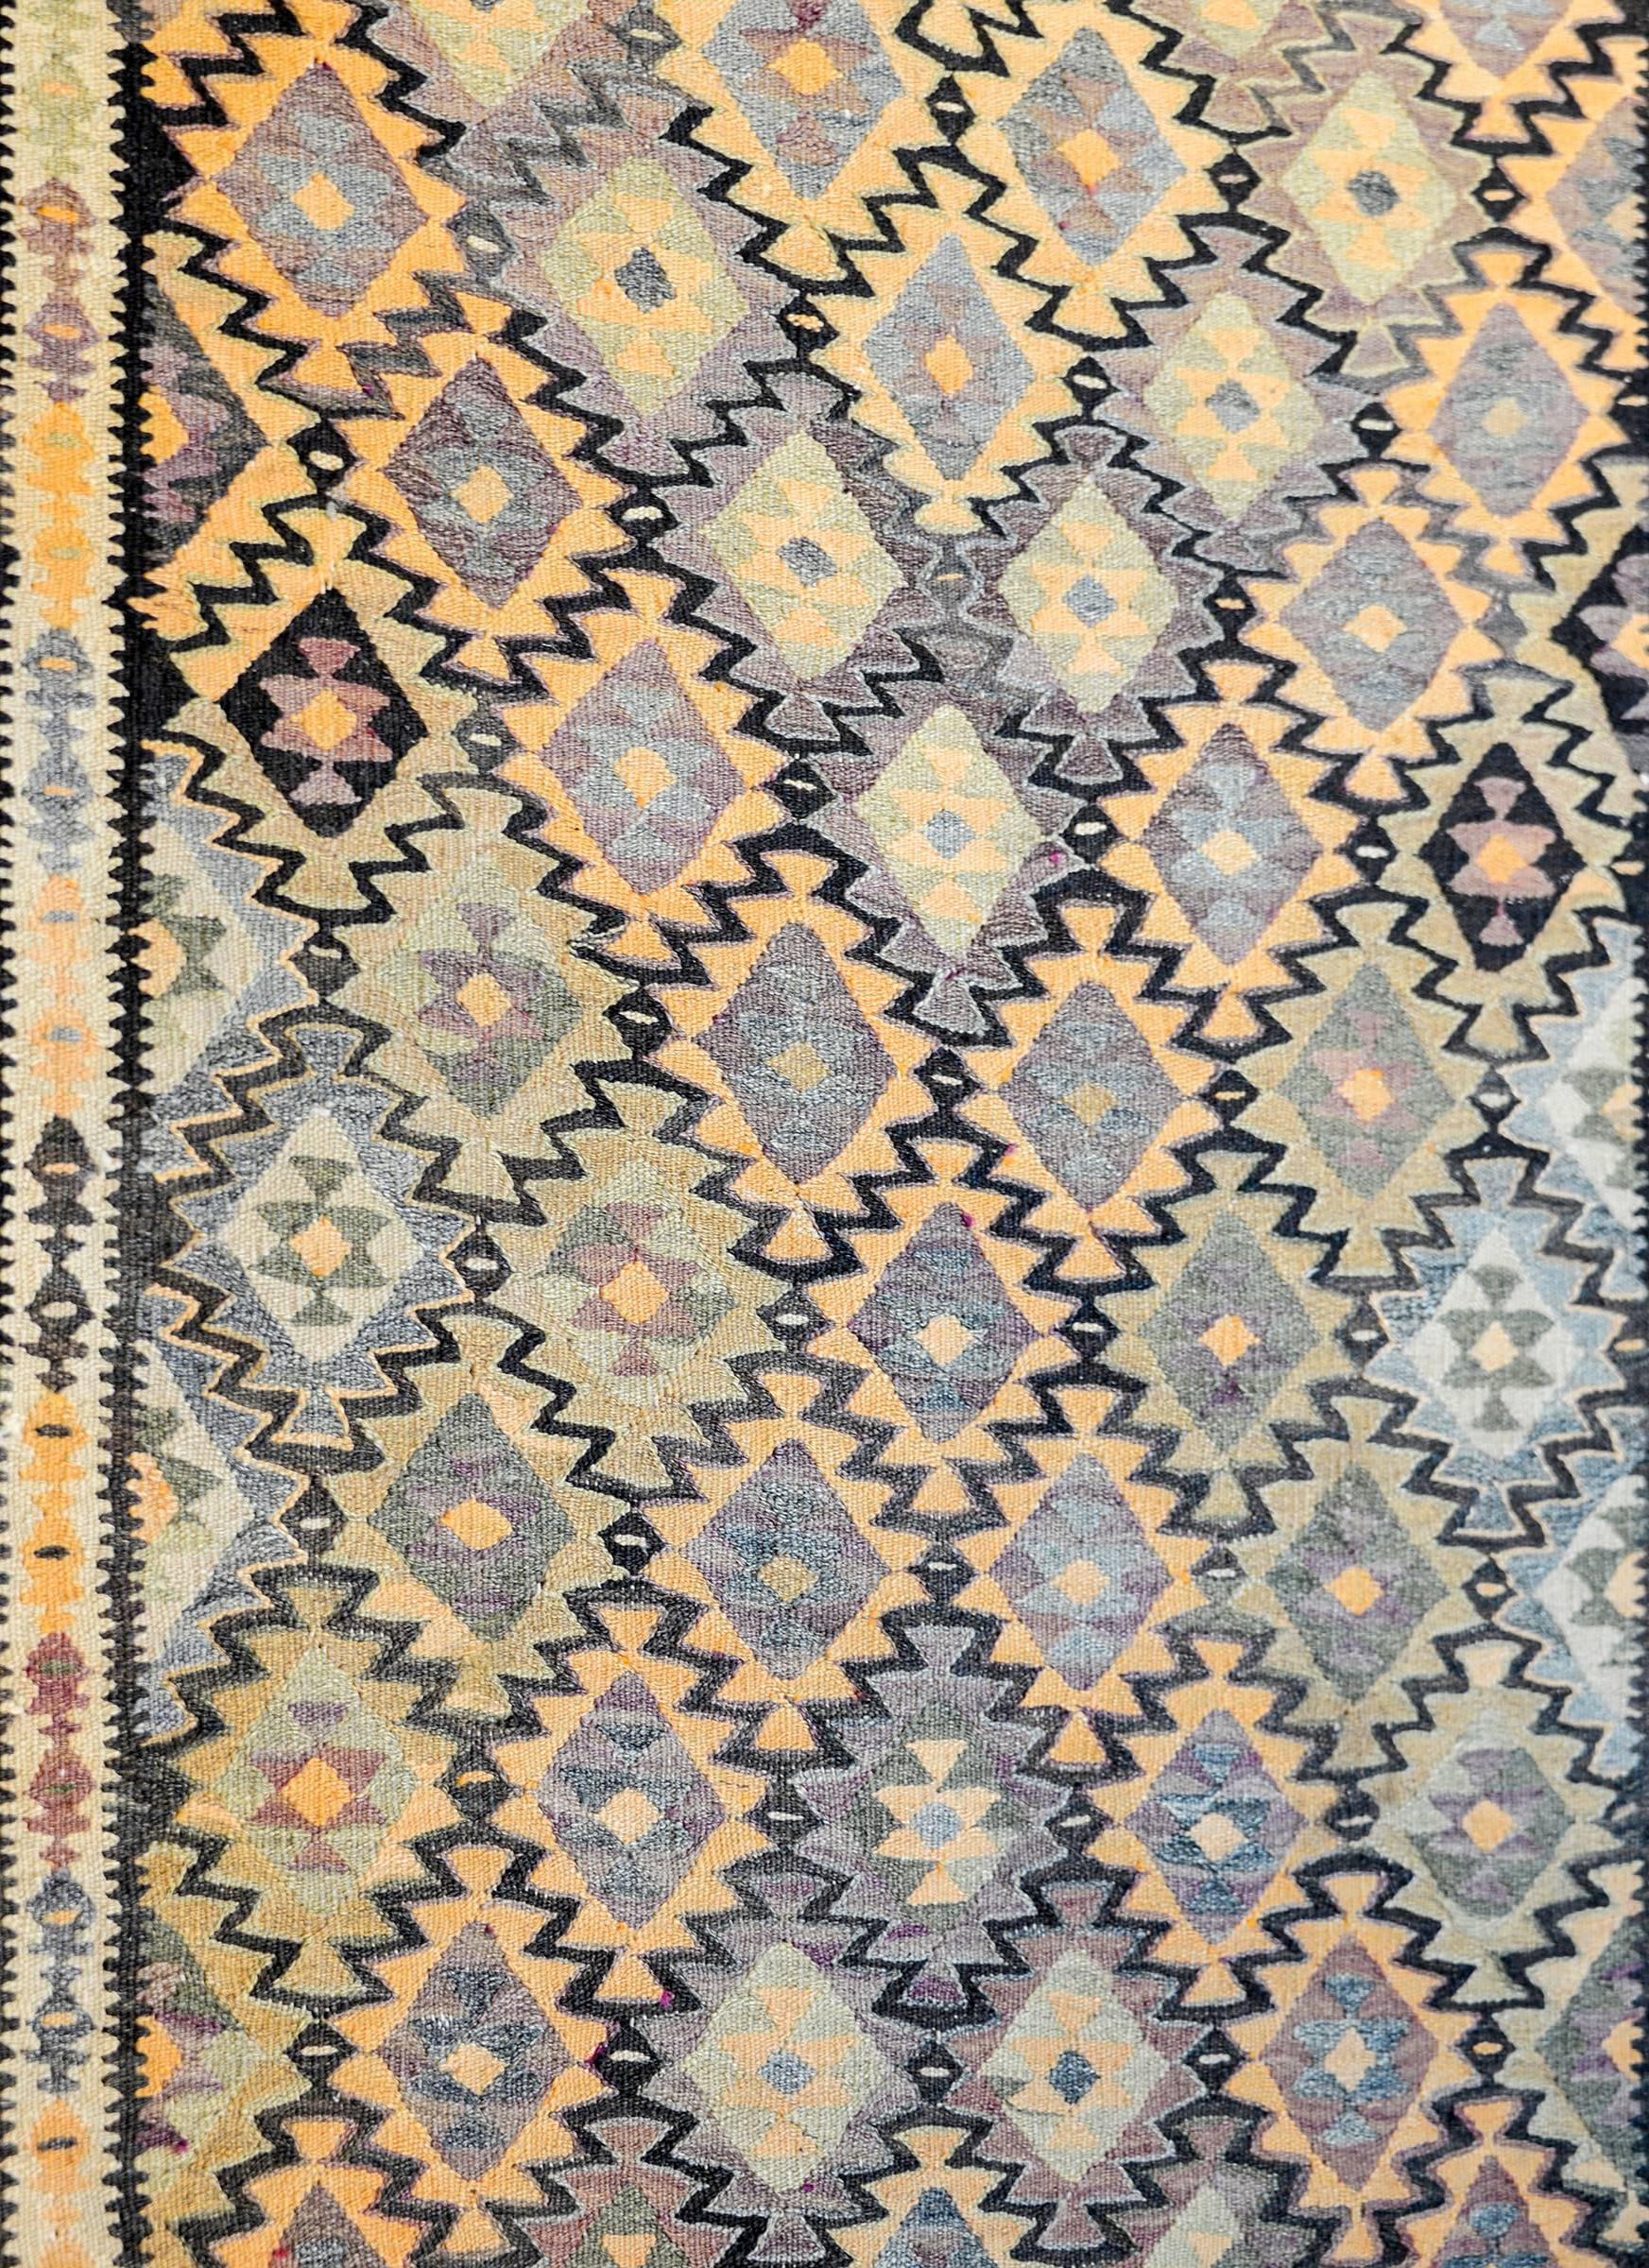 An amazing mid-20th century Persian Qazvin Kilim runner with an multicolored diamond pattern woven in such a way that a larger diamond pattern of orange, lilac, black and natural wool colored diamonds is created. The border is complex, with two